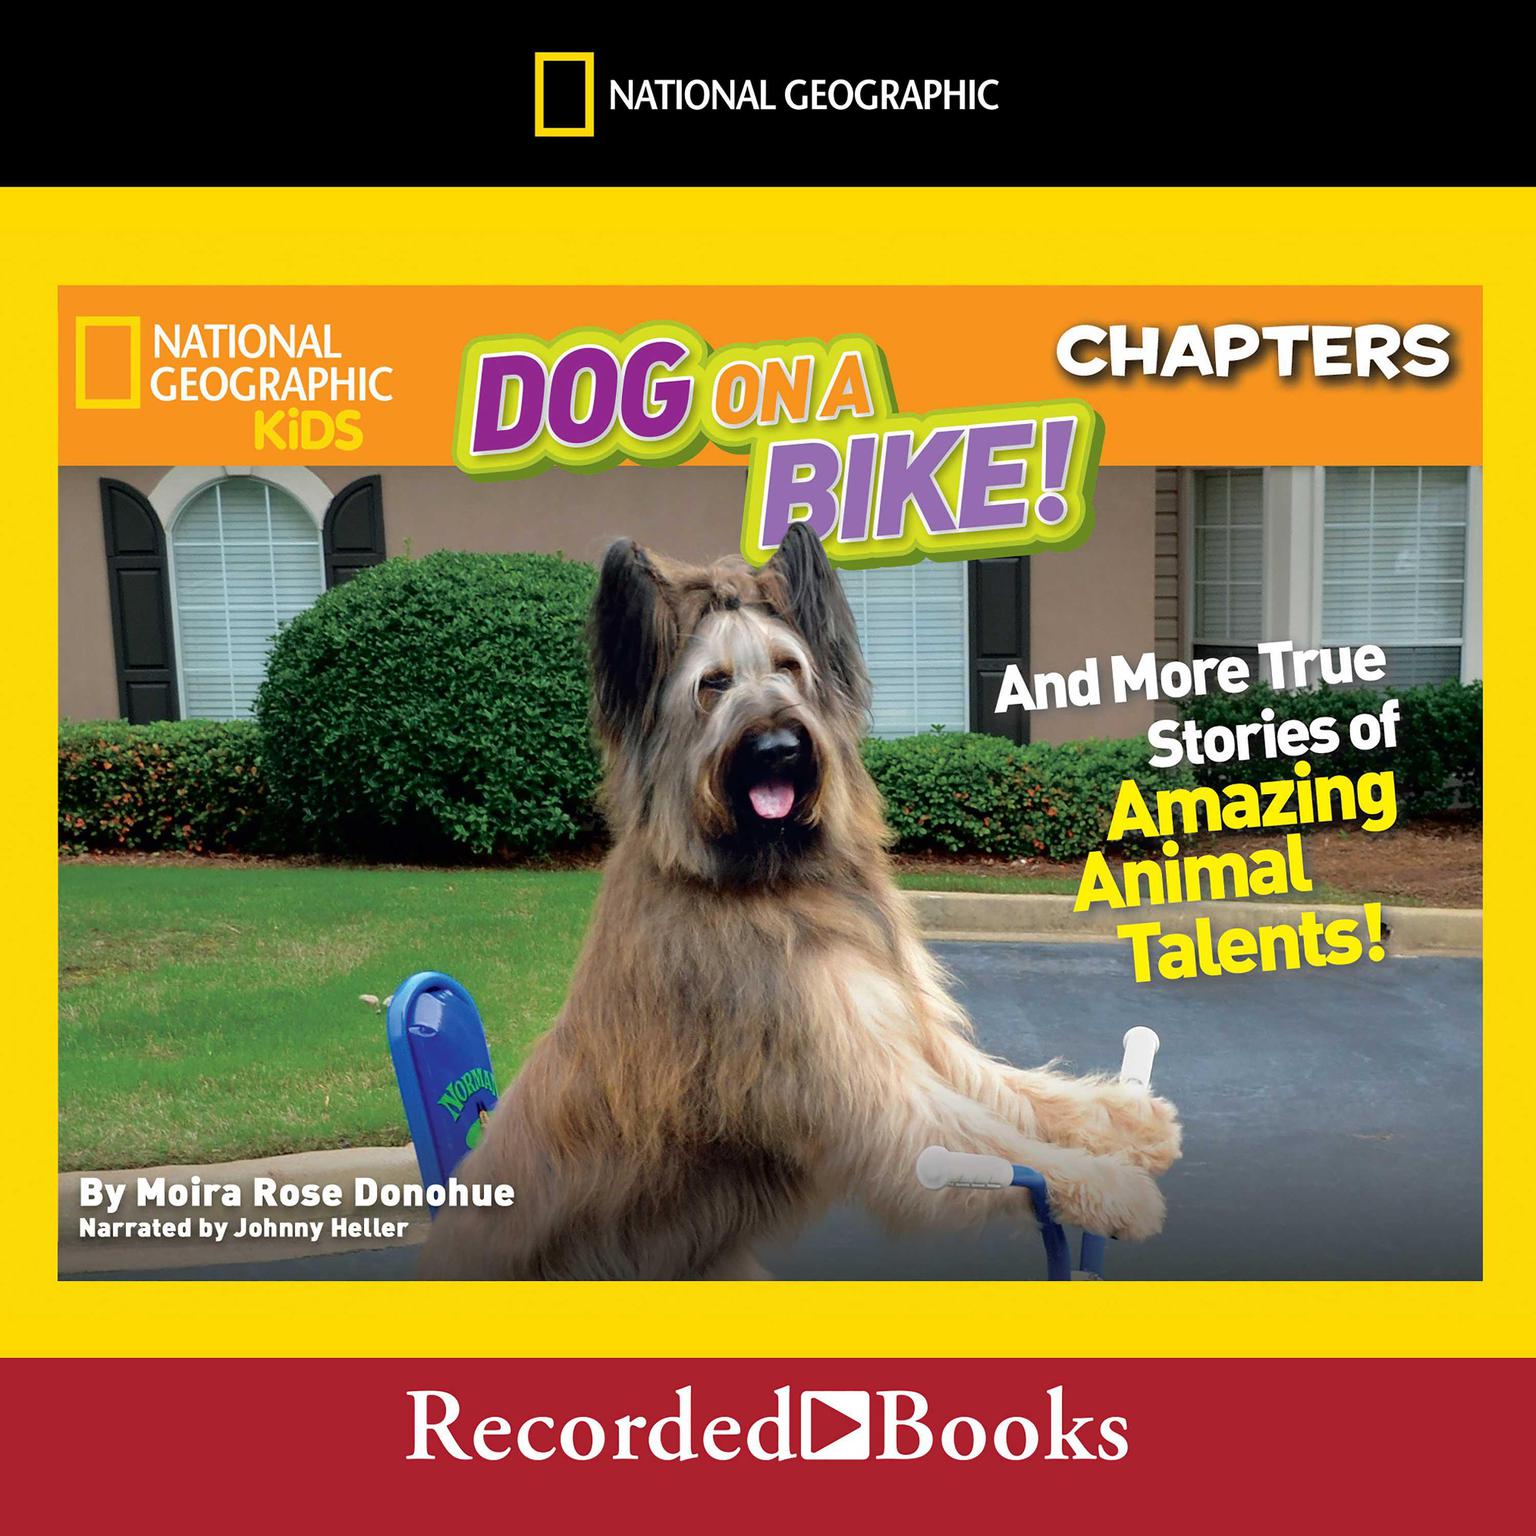 National Geographic Kids Chapters: Dog on a Bike: And More True Stories of Amazing Animal Talents! Audiobook, by Moira Rose Donohue